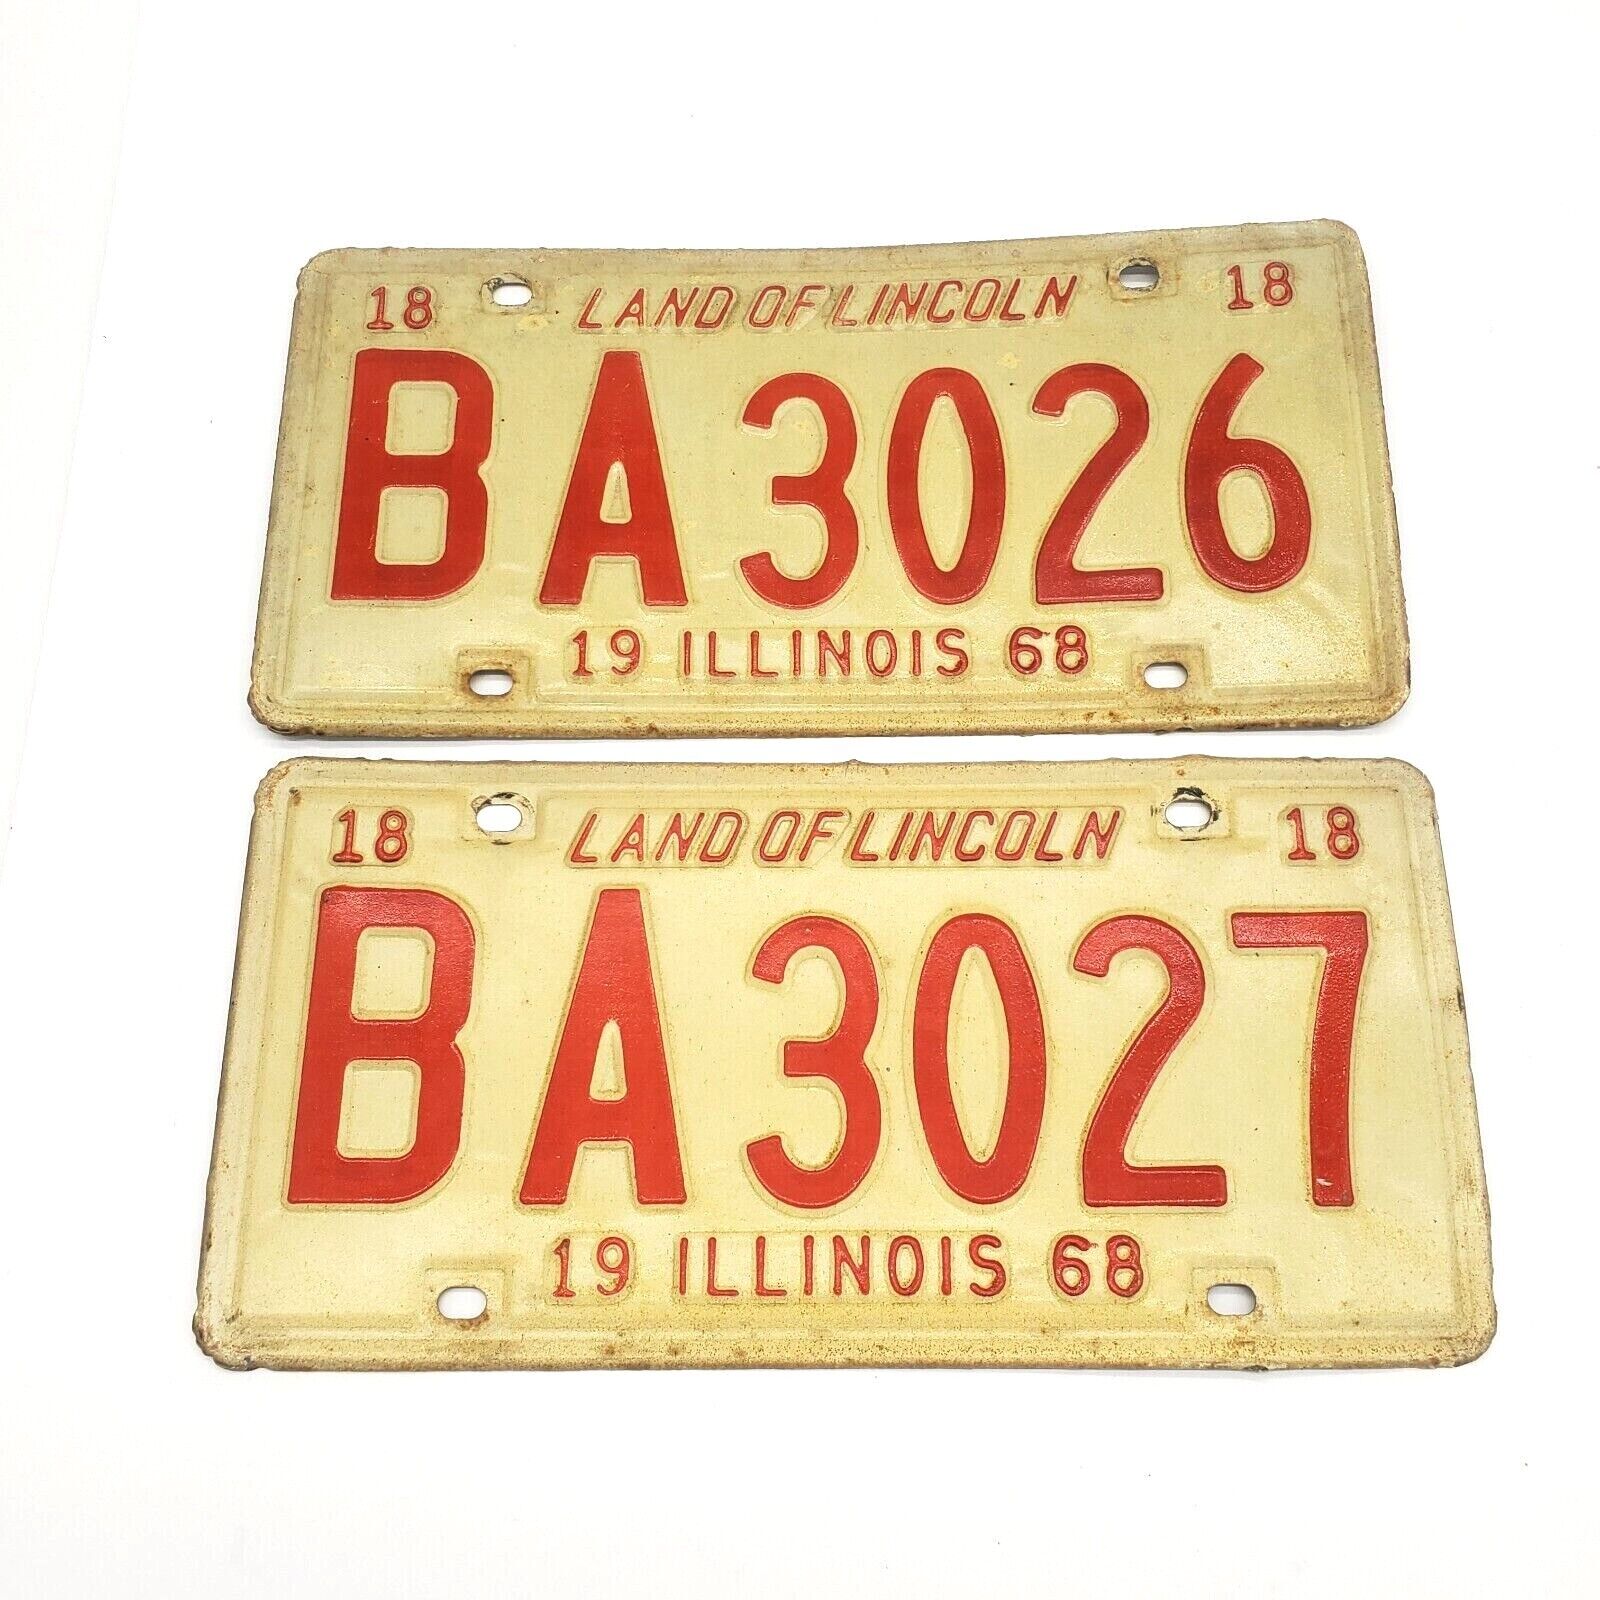 Rare two 1968 Illinois license Plate in consecutive numbers BA 3026 & BA 83027